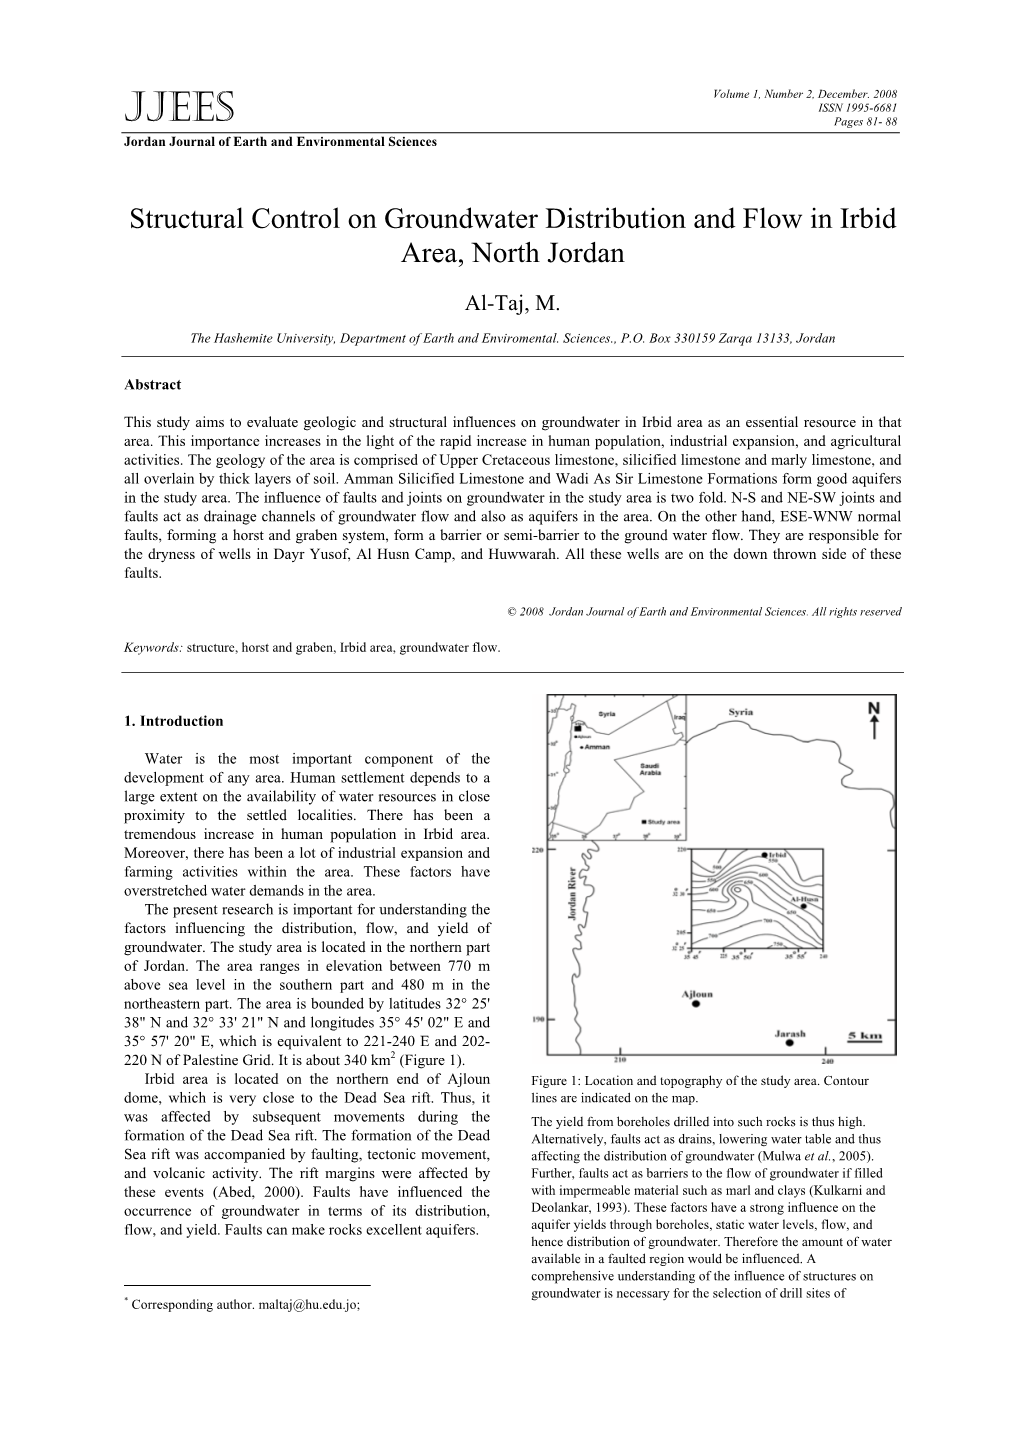 Structural Control on Groundwater Distribution and Flow in Irbid Area, North Jordan